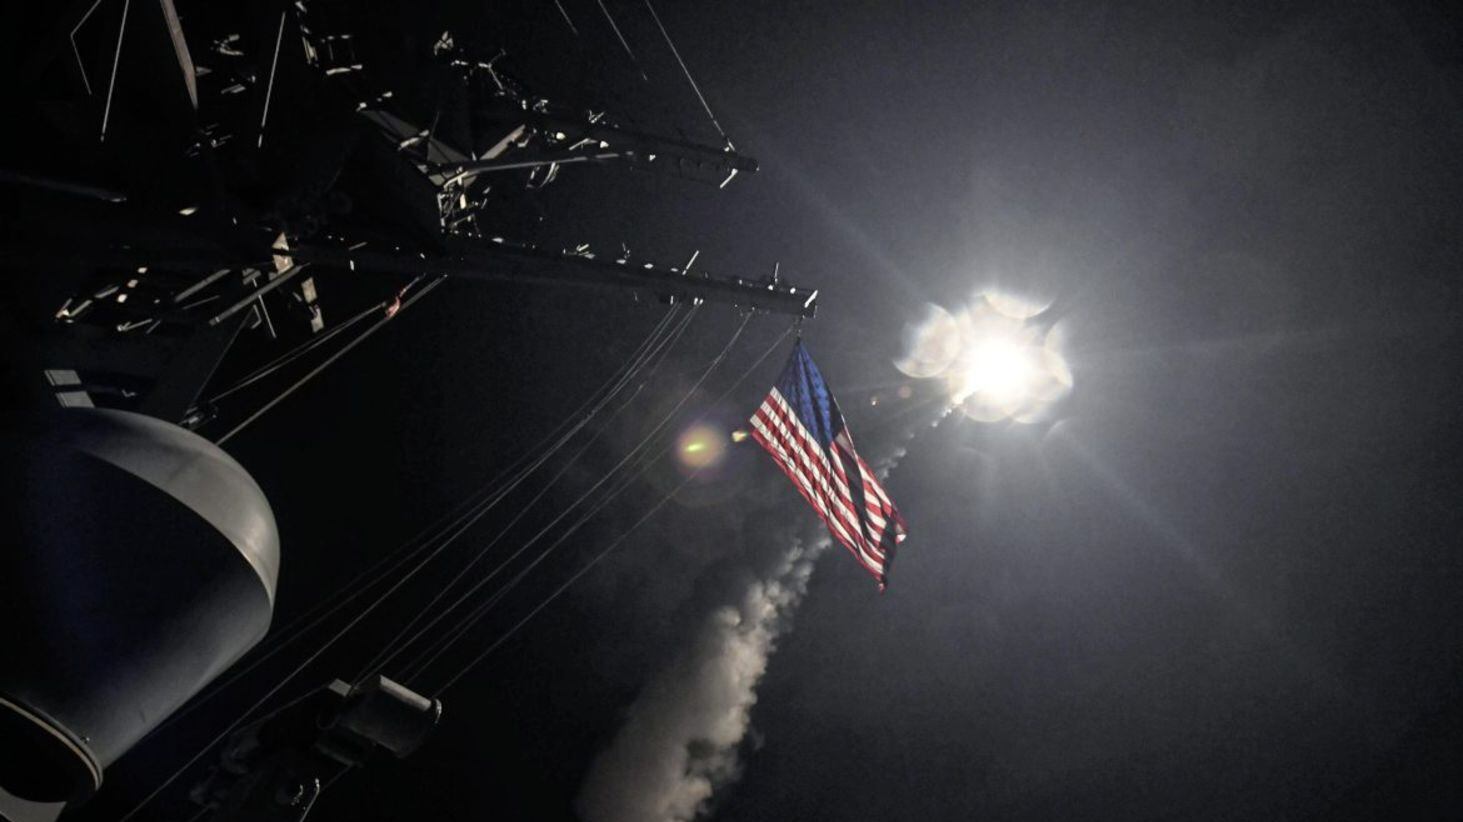 A tomahawk land attack missile is fired from the Mediterranean Sea last week, as Britain backed the US missile strike on a Syrian air base as an &quot;appropriate response&quot; to Bashar Assad regime&#39;s &quot;barbaric&quot; chemical attack. Picture by Seaman Ford Williams, US Navy, Press Association 